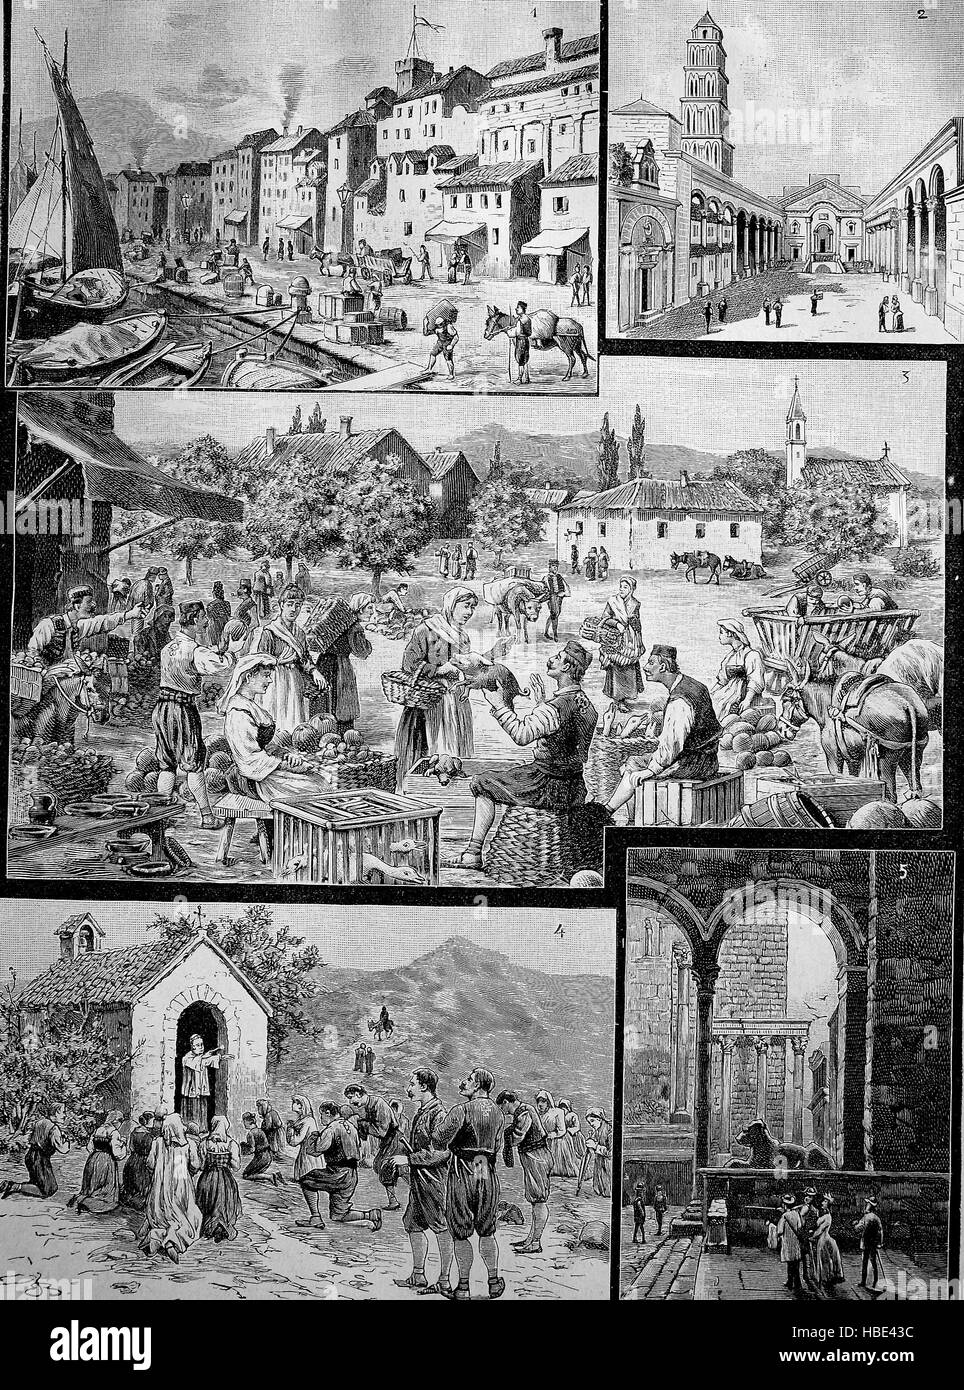 Pictures from Spalato and surroundings, Spalato is now Spli, Croatia, illustration, woodcut from 1880 Stock Photo